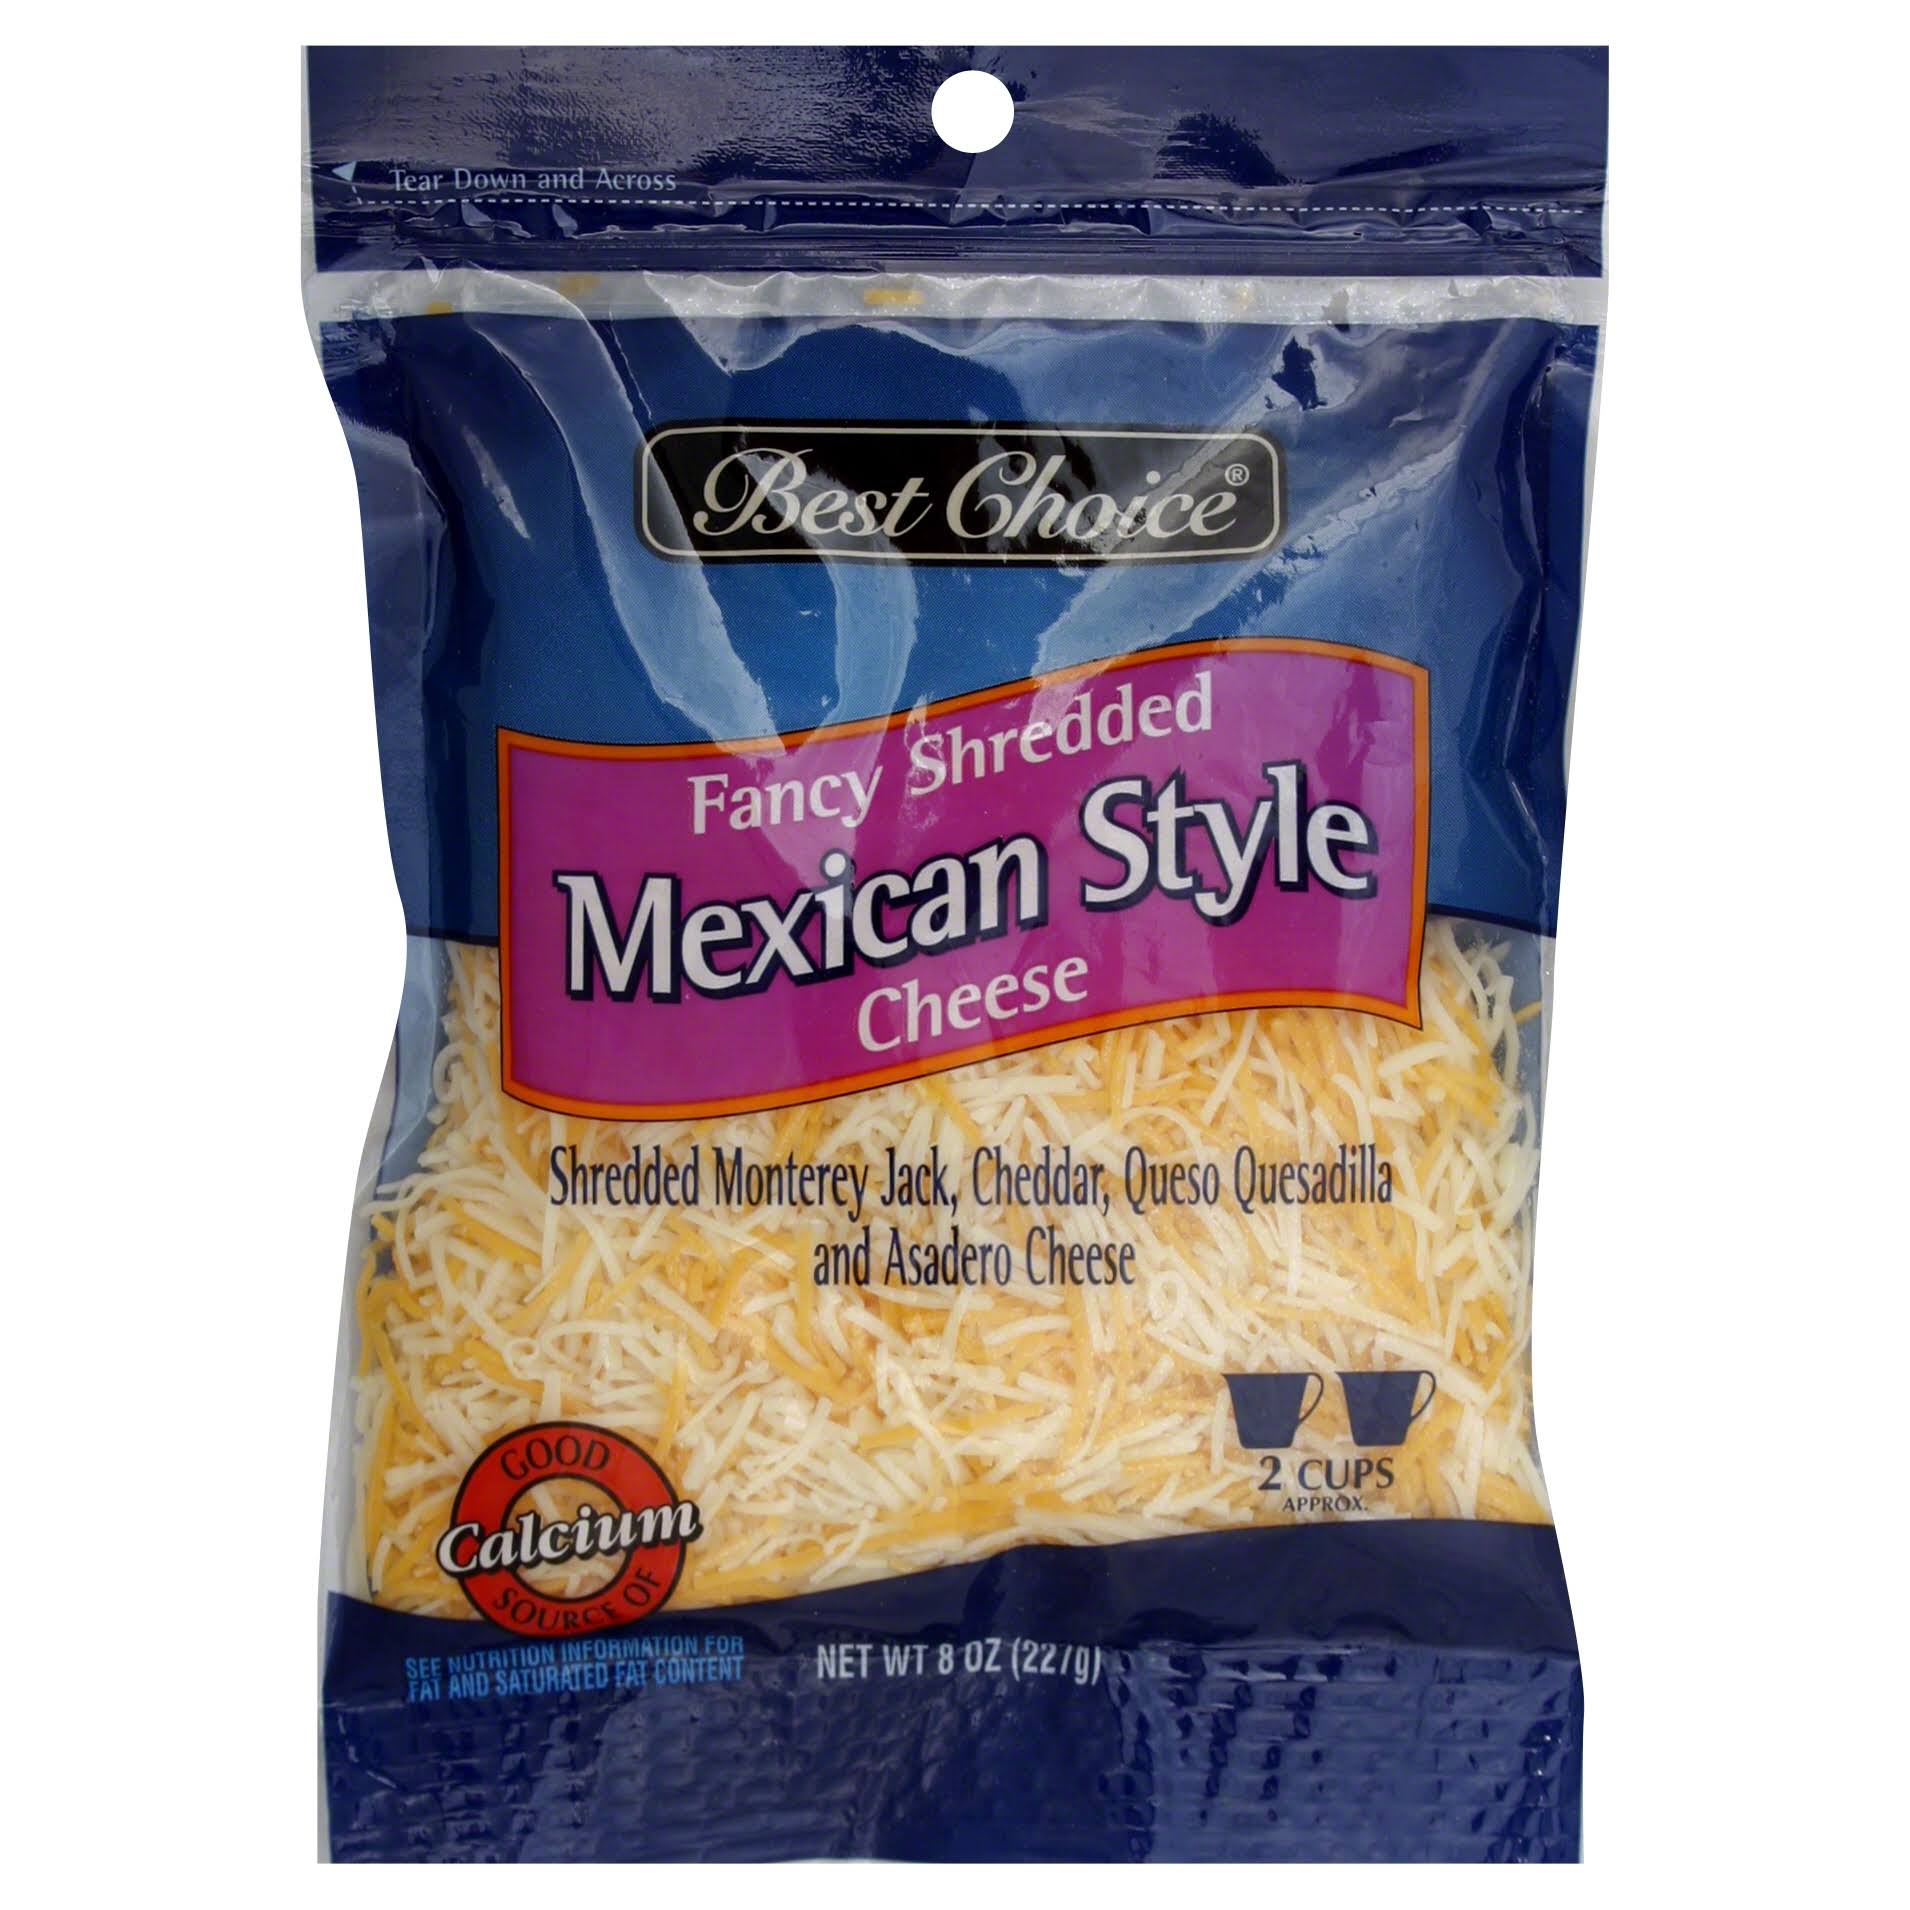 Best Choice Shredded Cheese, Fancy, Mexican Style - 8 oz